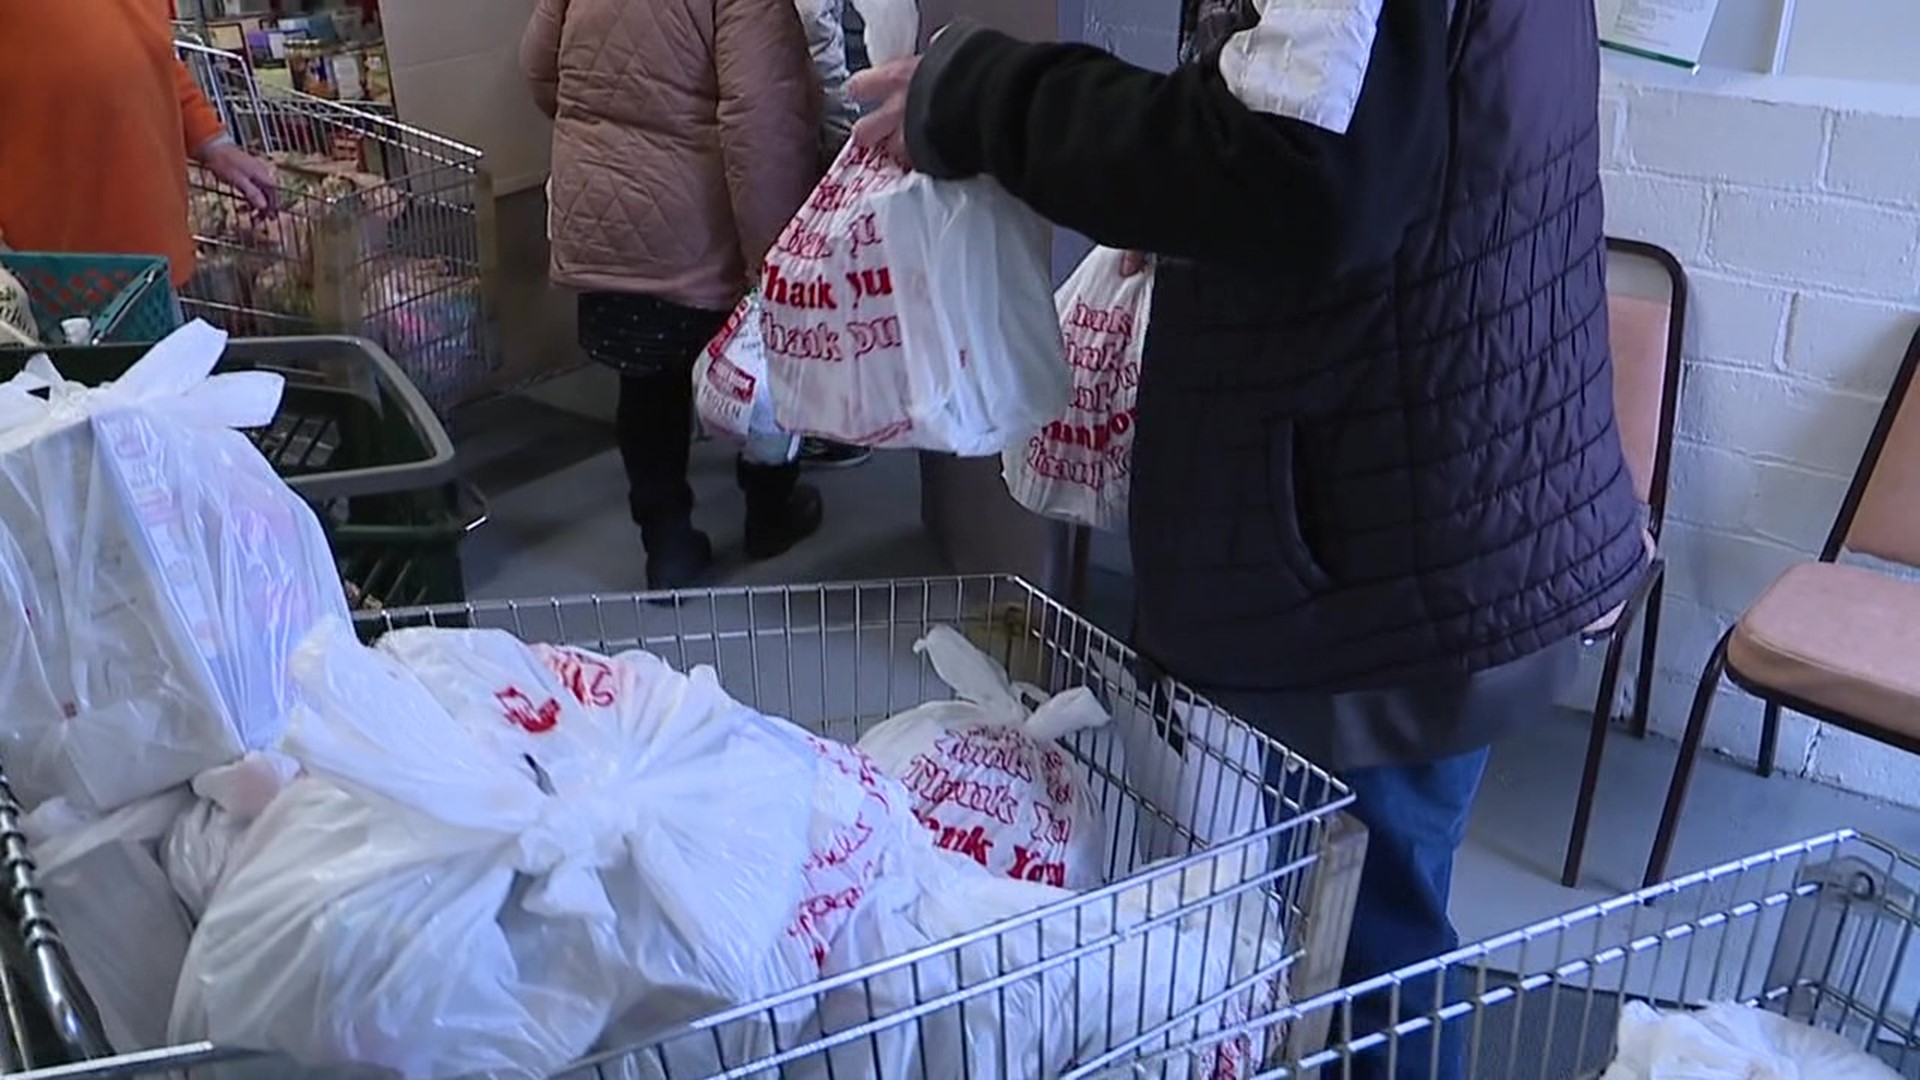 Folks in Wilkes-Barre got everything they needed for a holiday meal.